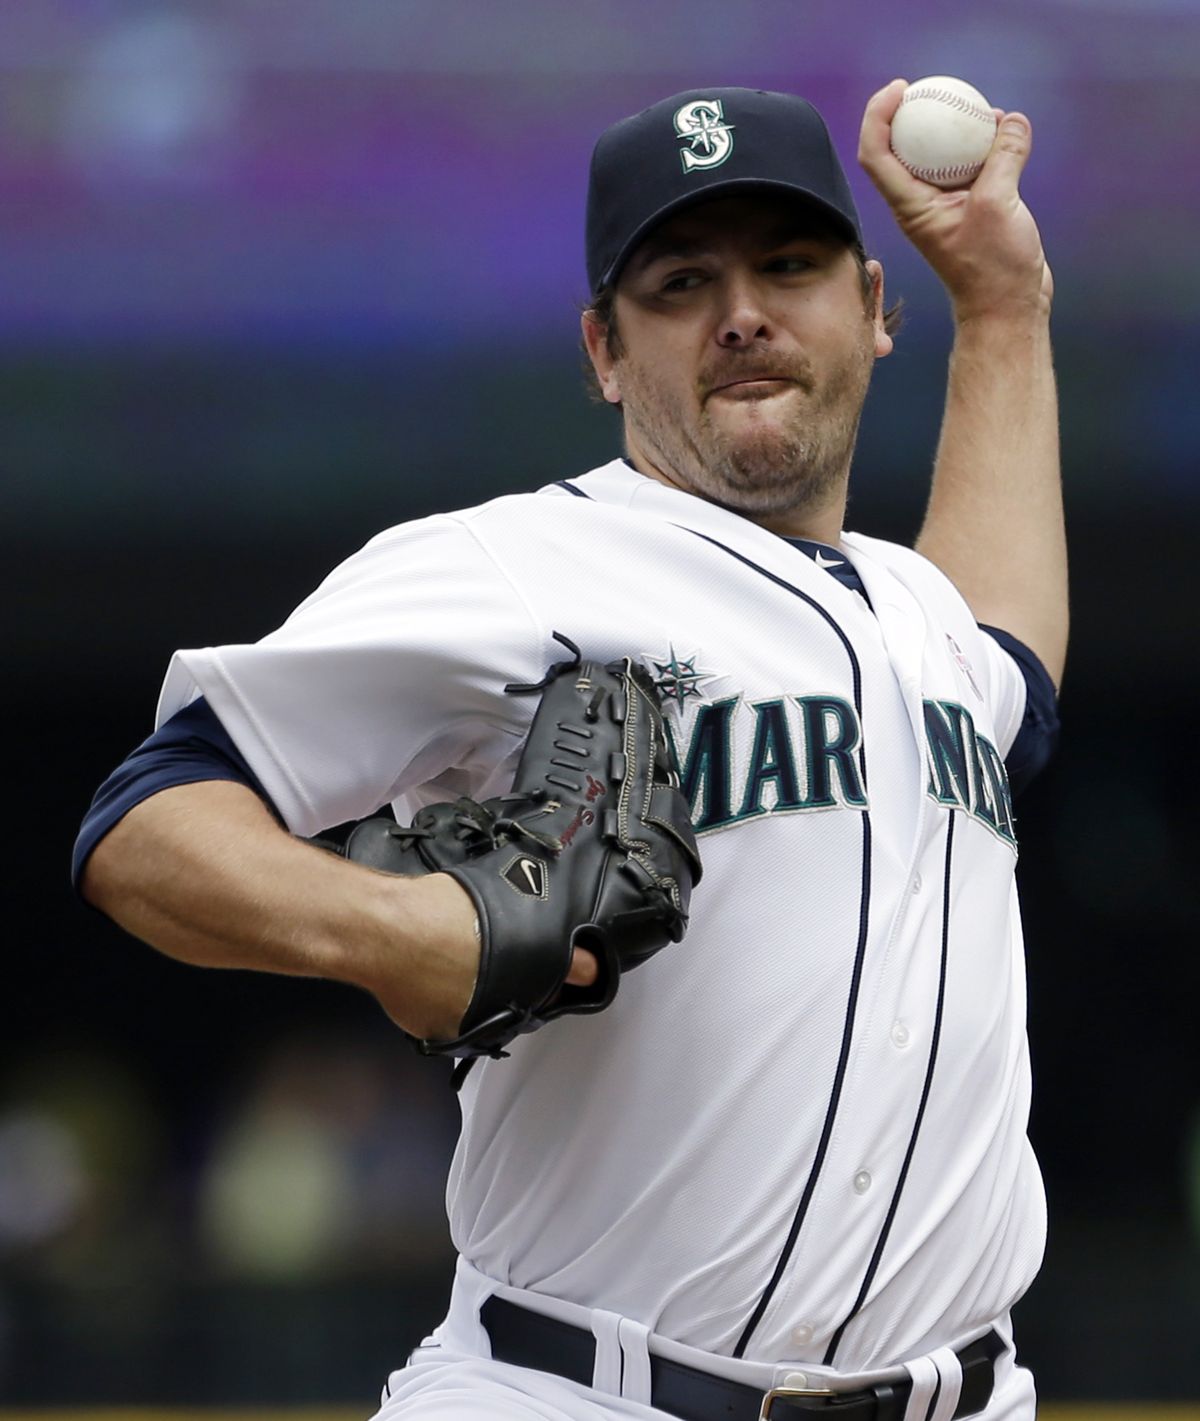 Seattle’s Joe Saunders improved to 3-0 with an ERA of 0.94 in four home starts this season. (Associated Press)